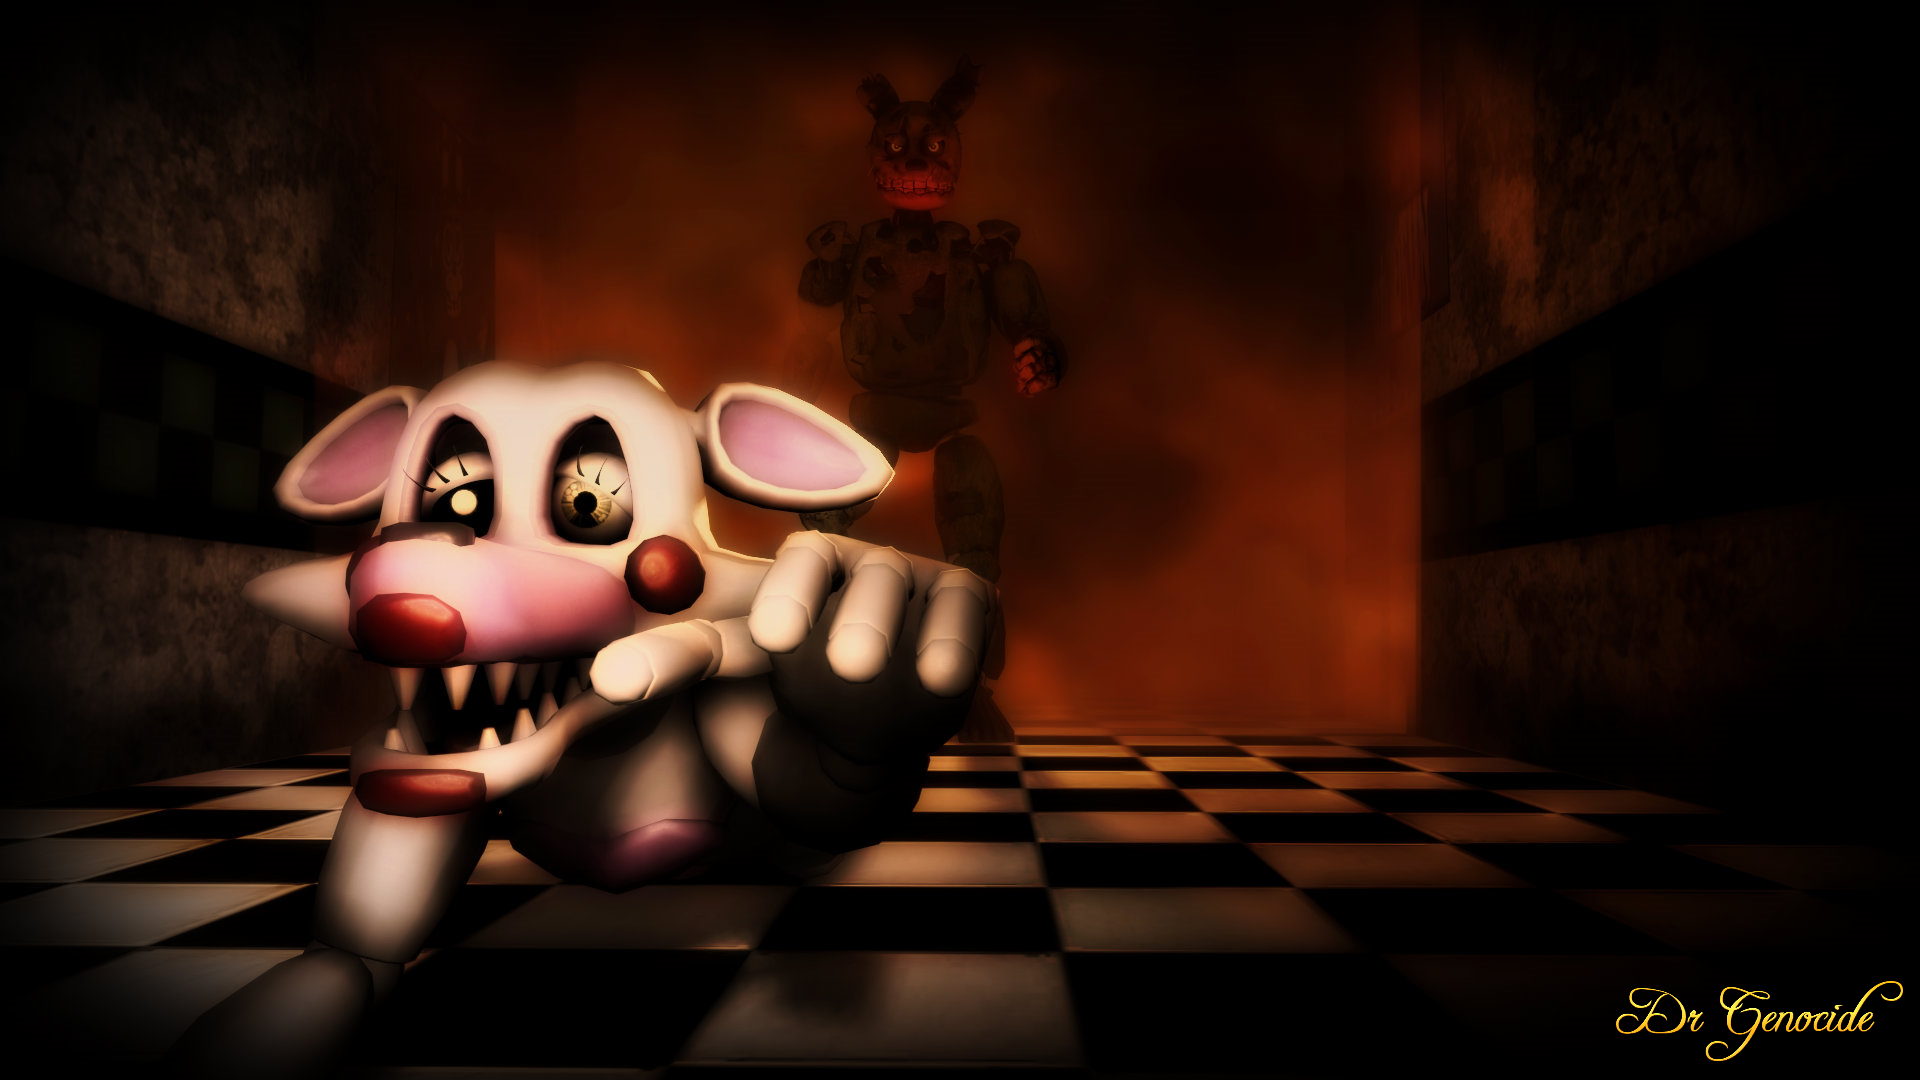 Moving Five Nights At Freddy's - HD Wallpaper 